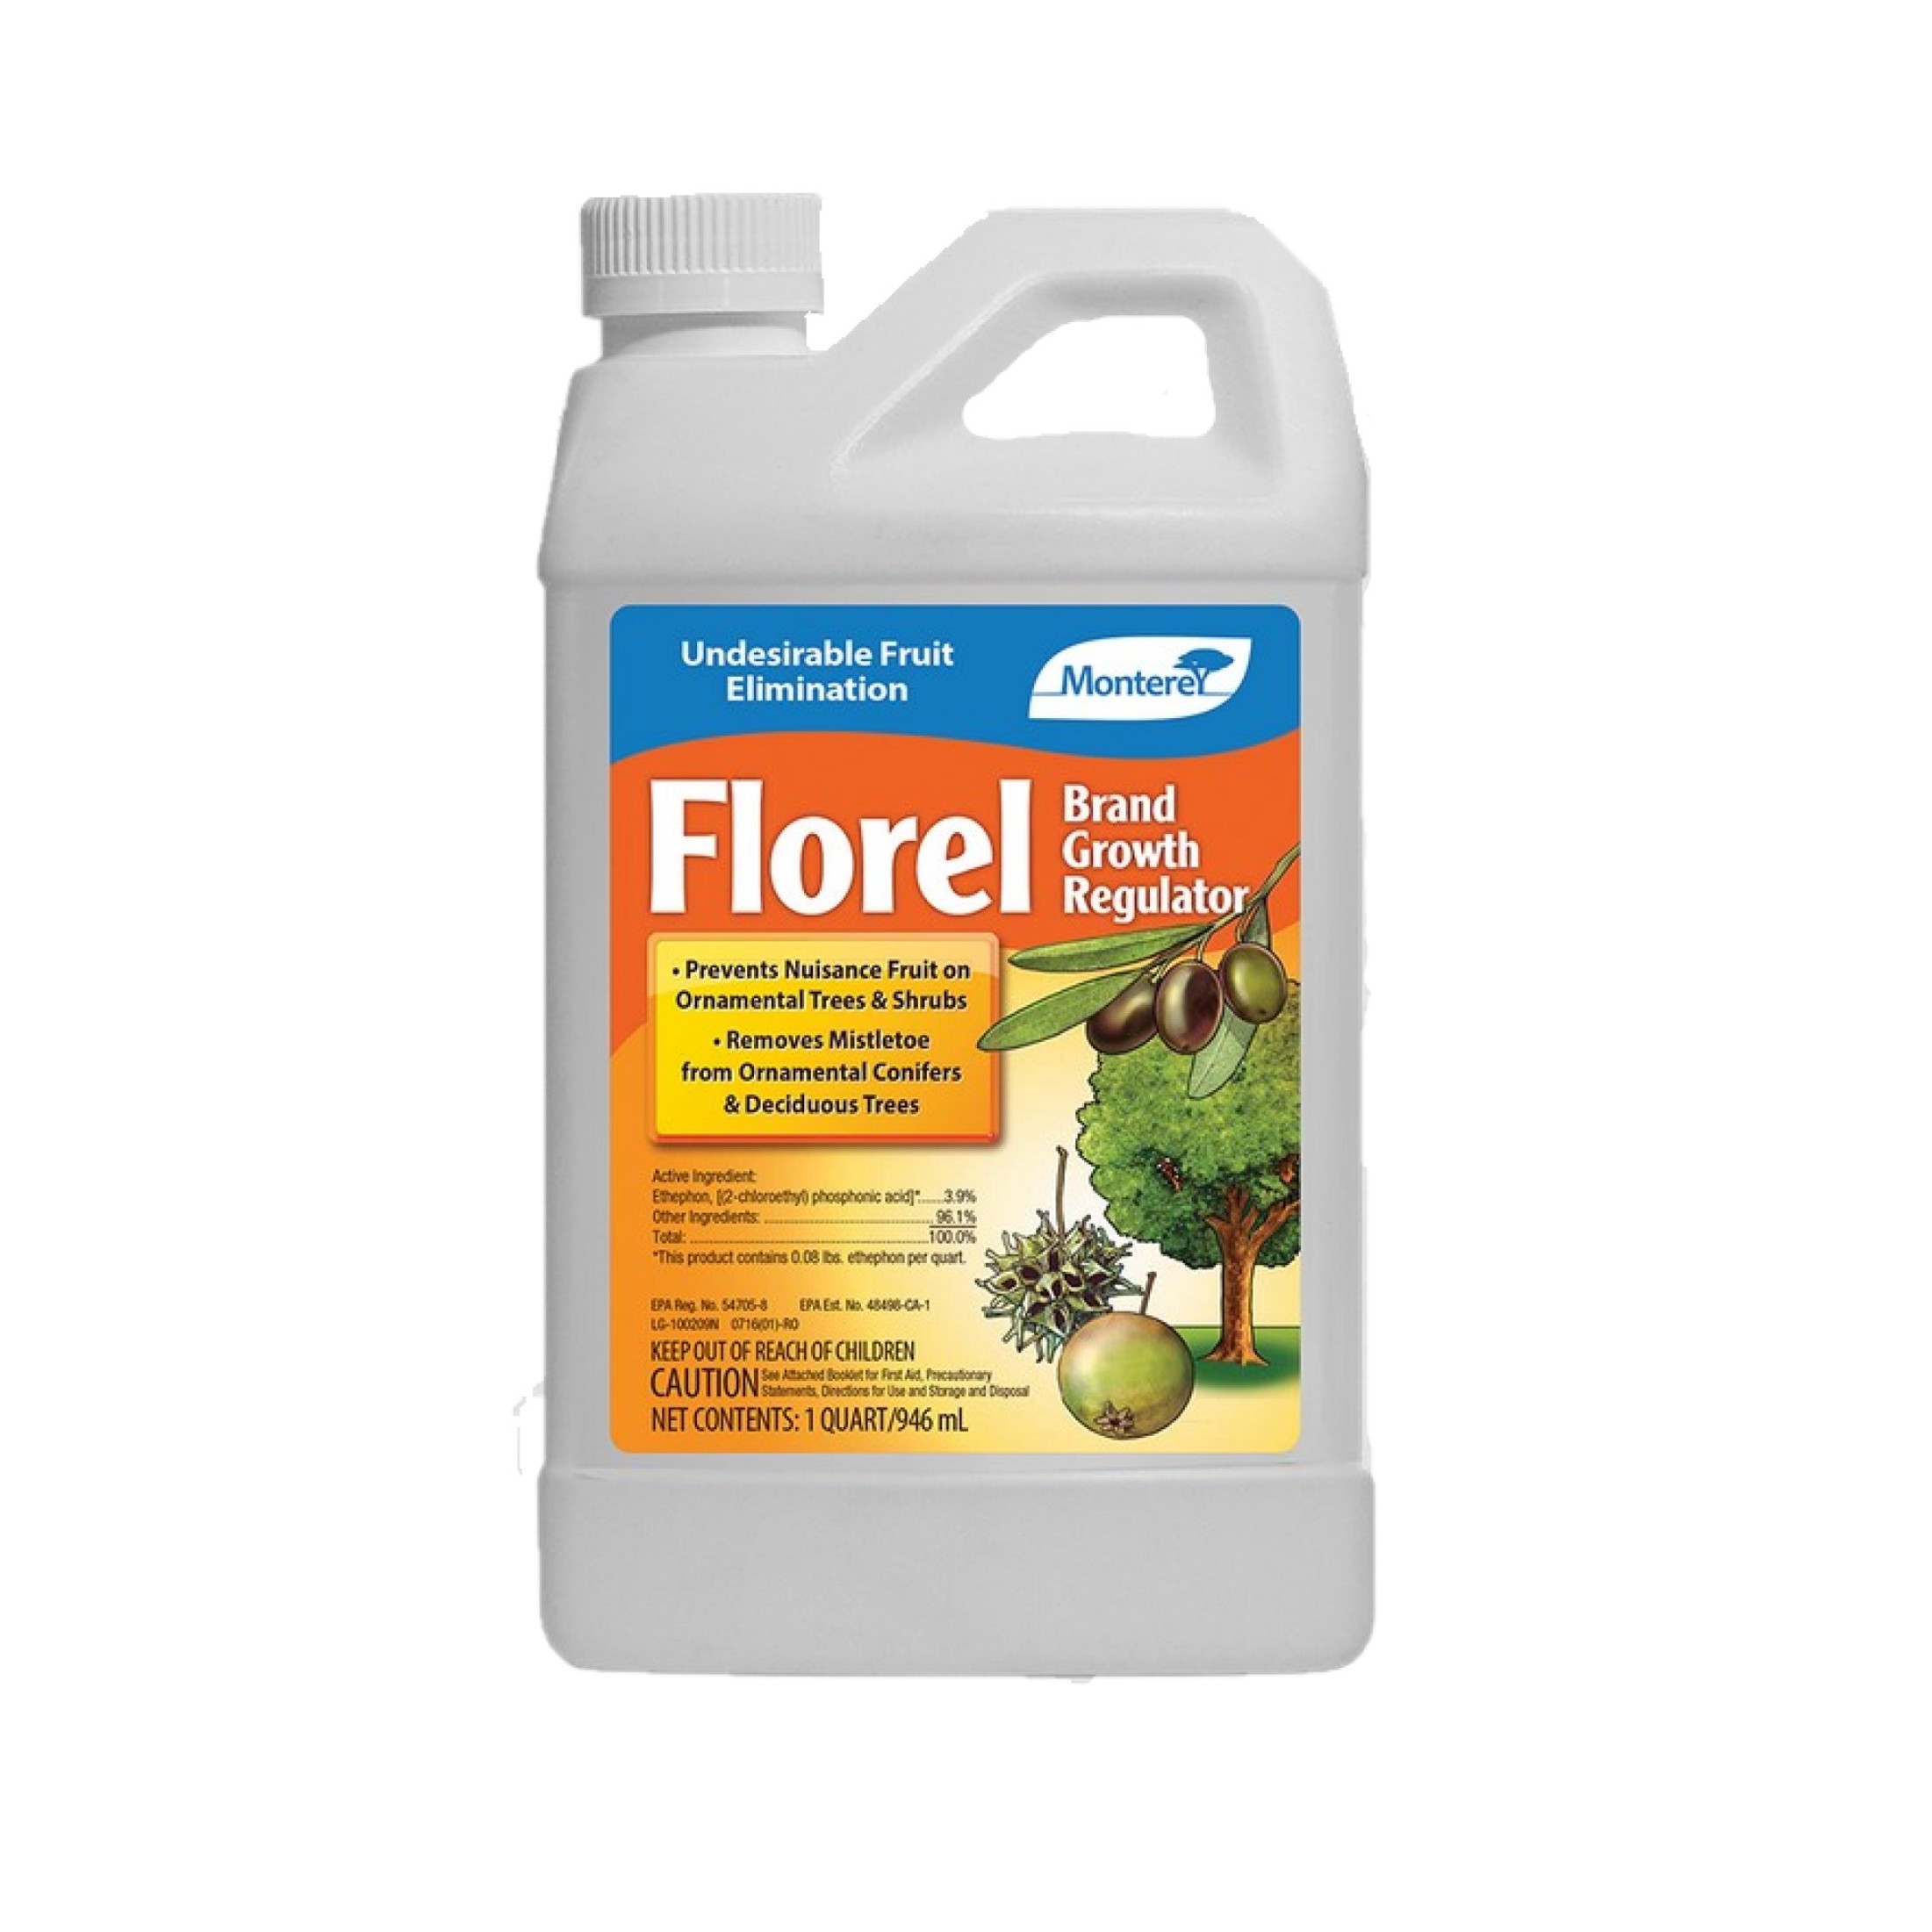 Monterey Florel Brand Growth Regulator (Registered for sale in AZ, CA, NY & WA only), 32 Ounces